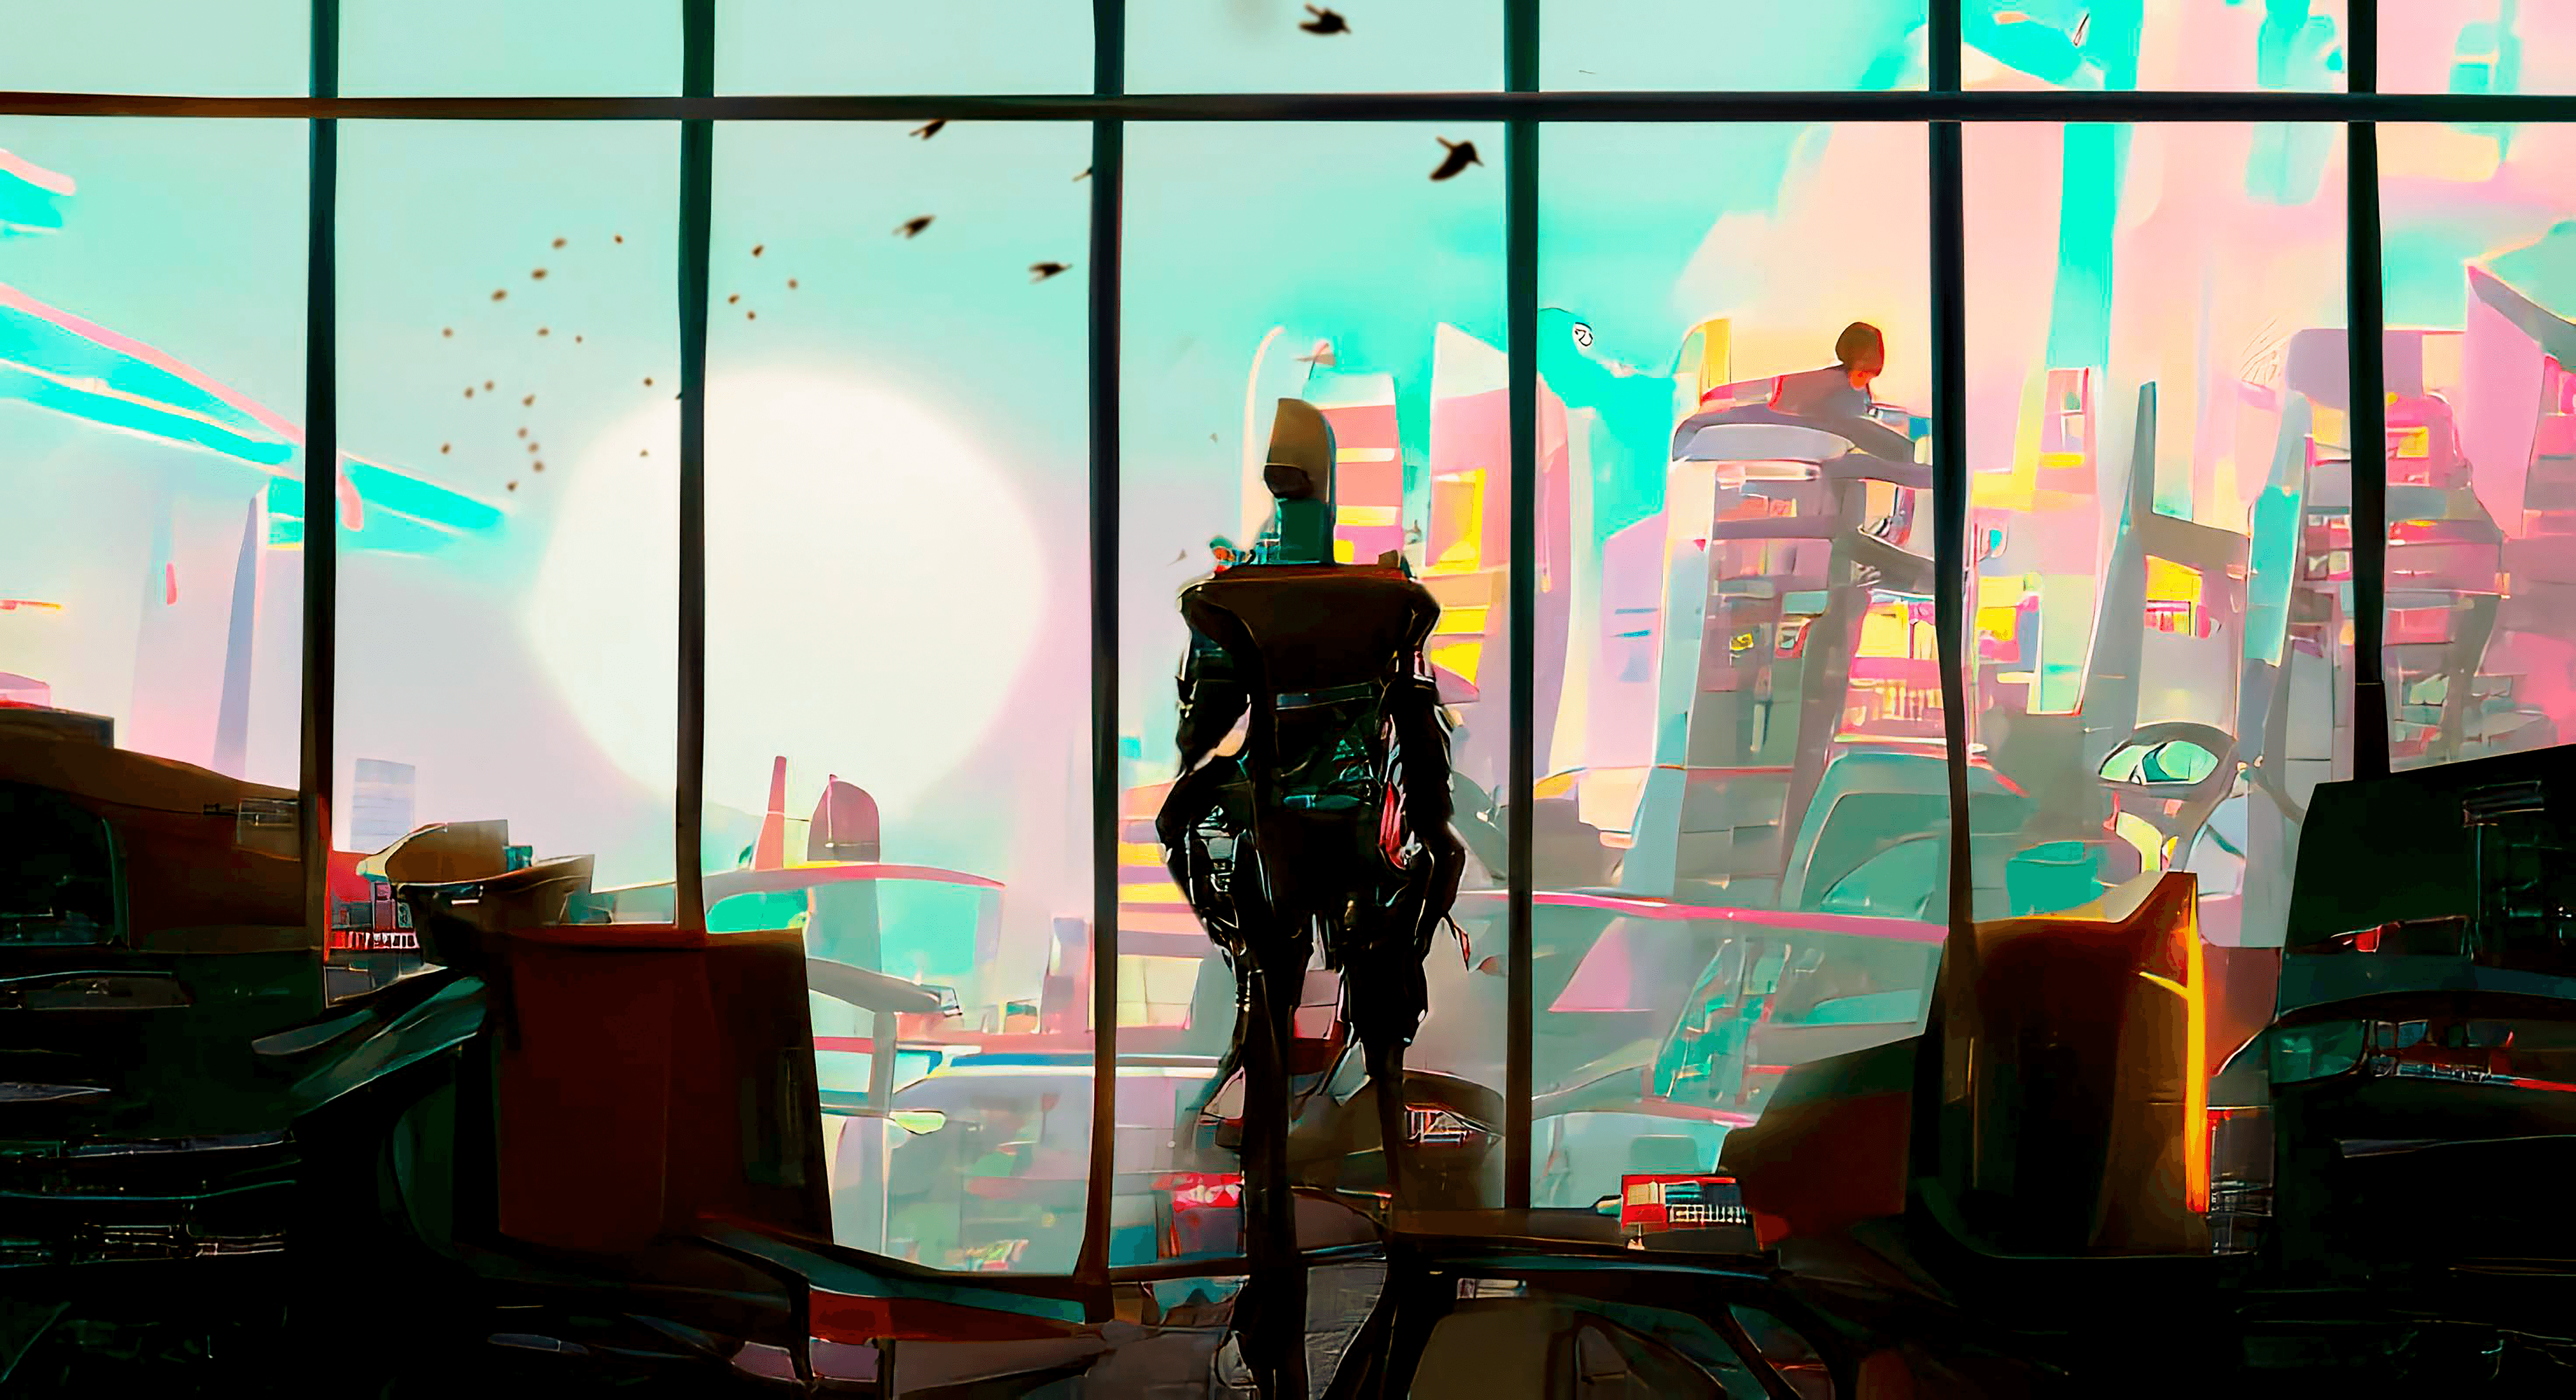 Robot With a View #2